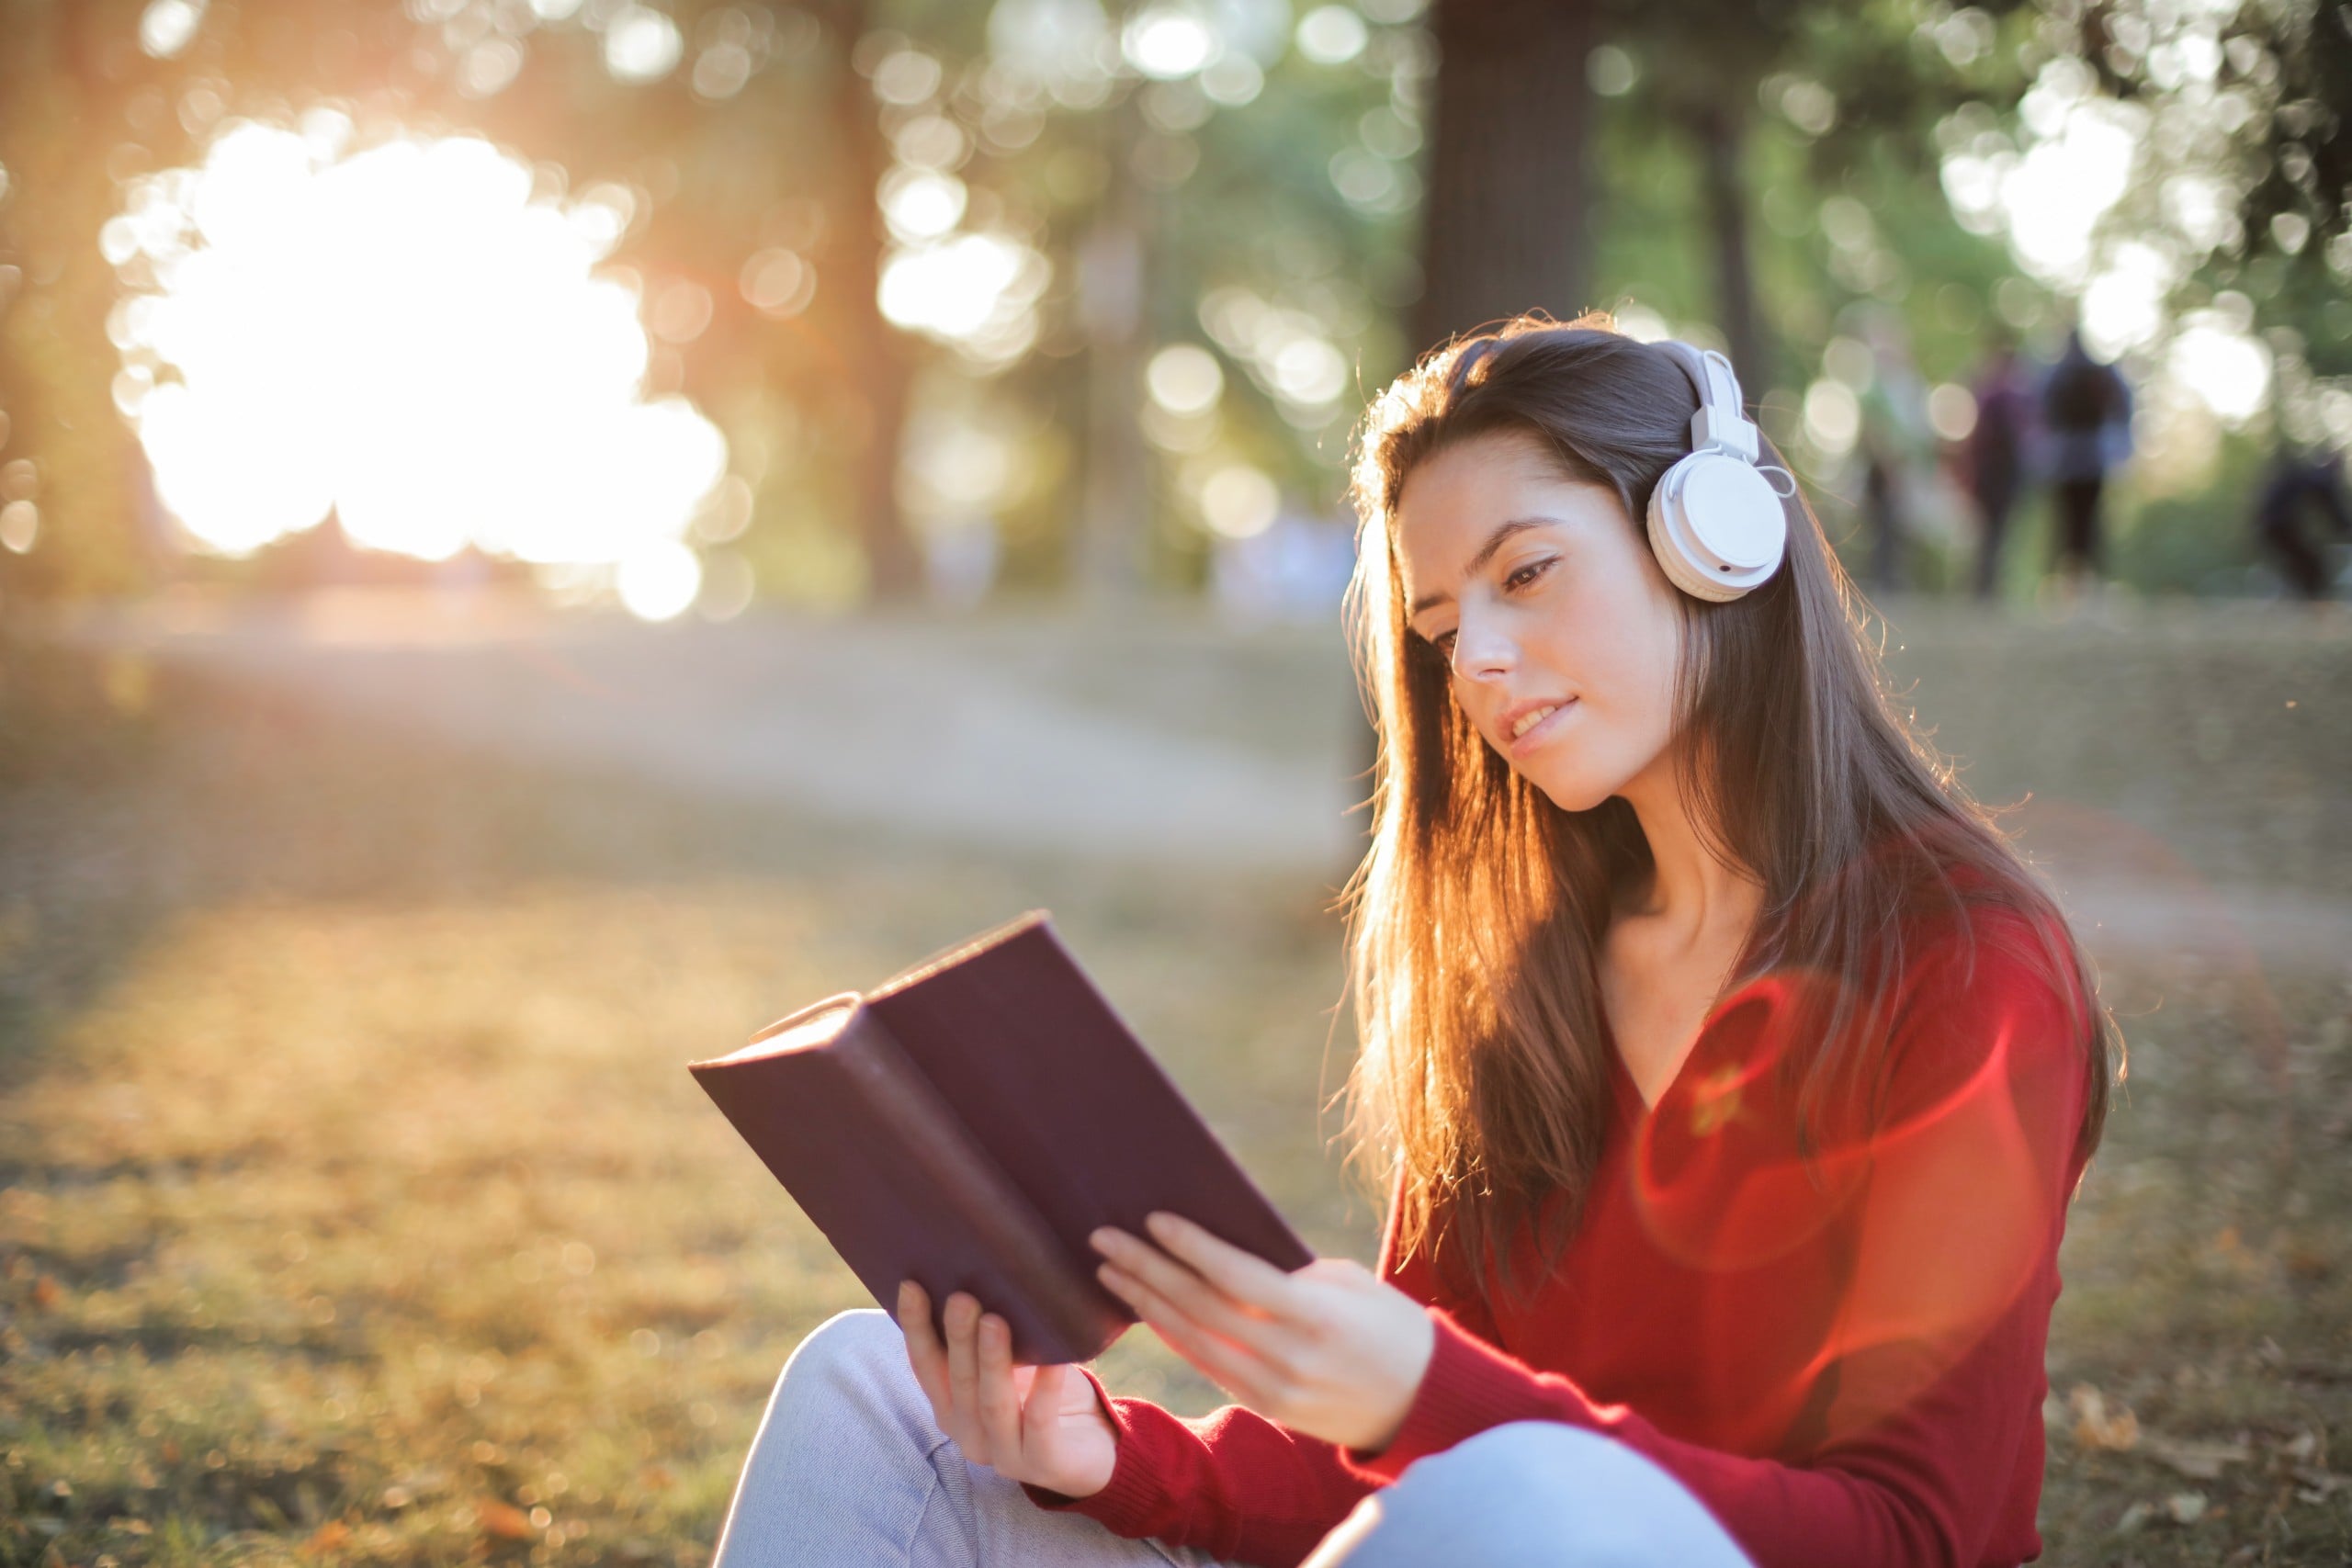 A woman enjoying nature, wearing headphones, and engrossed in a book while sitting on the grass.